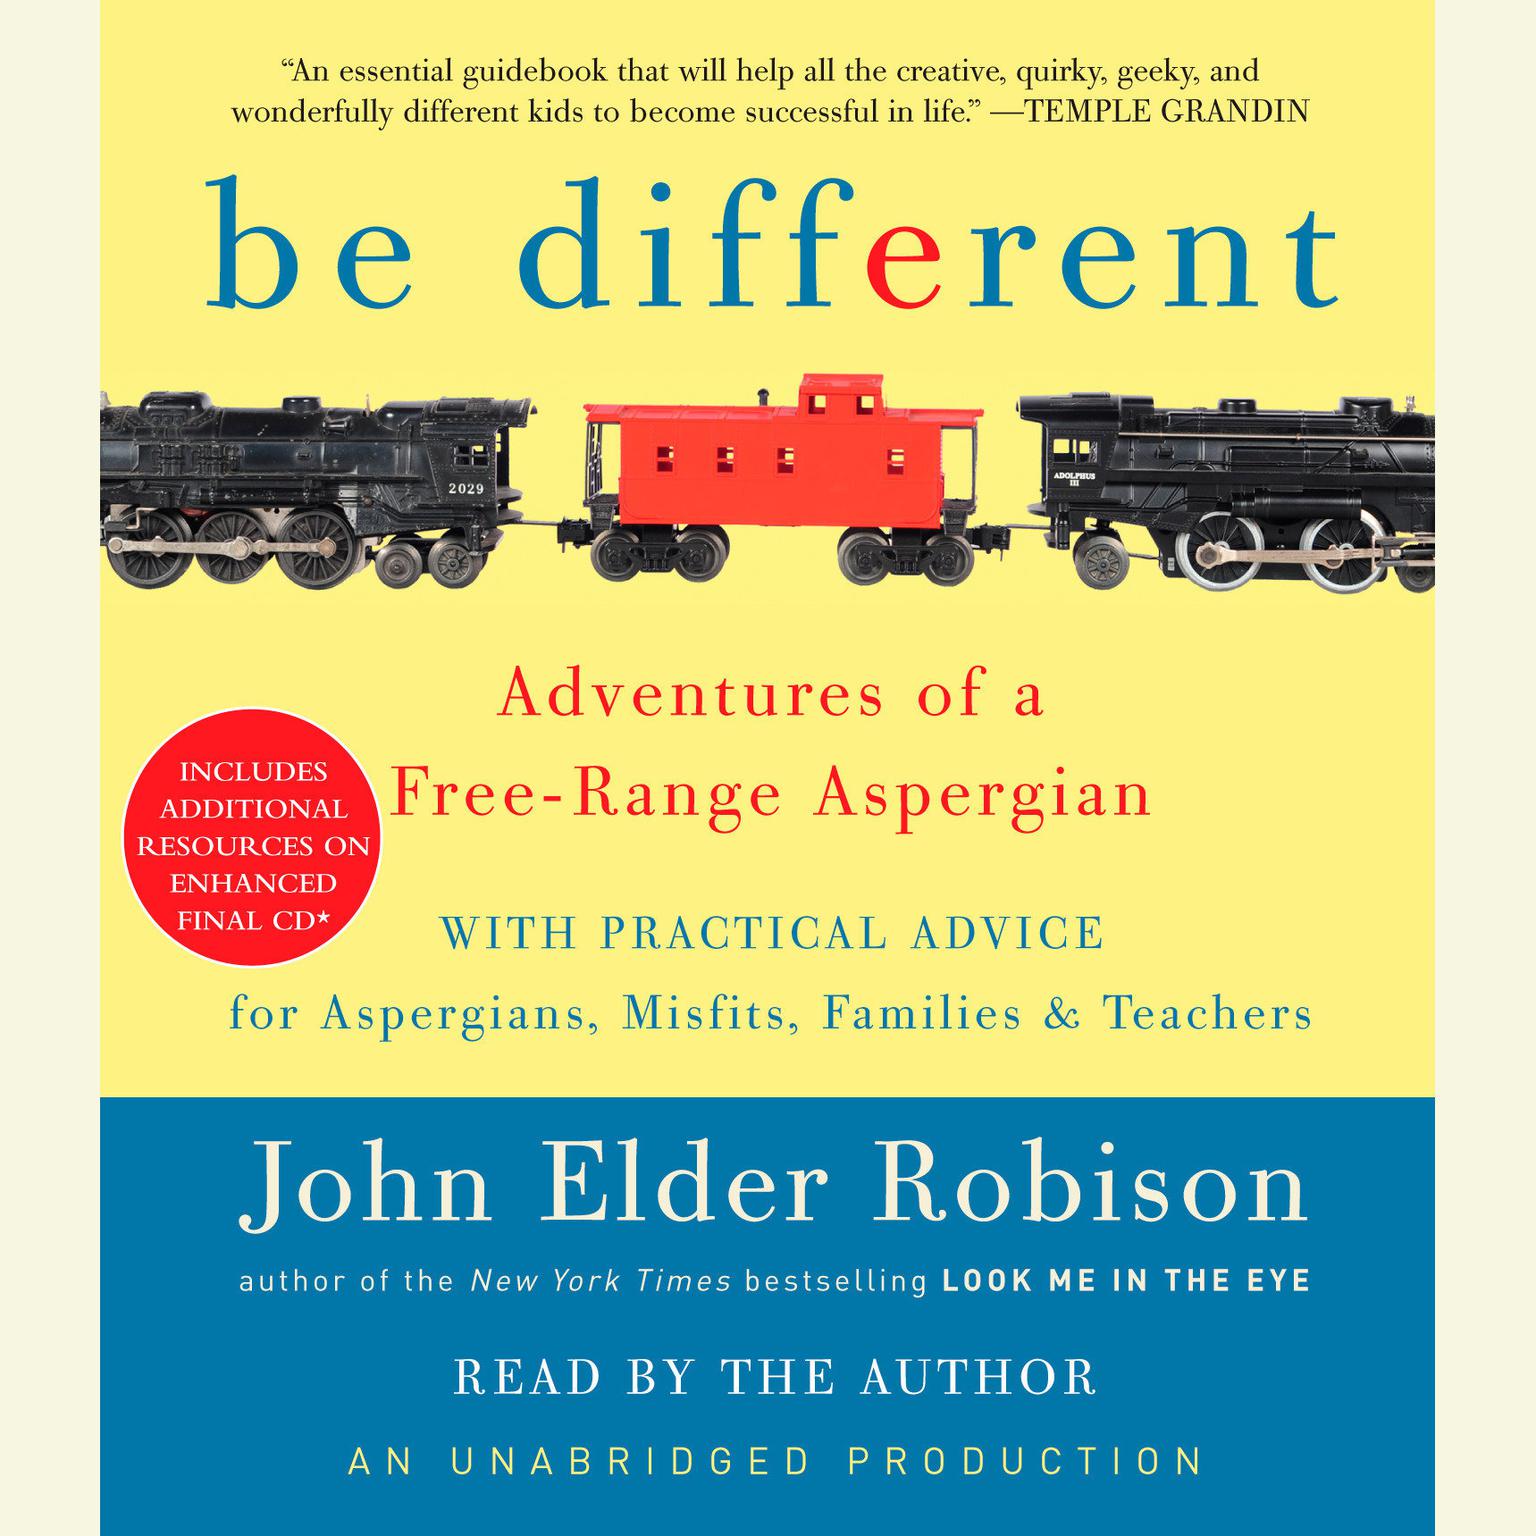 Be Different: Adventures of a Free-Range Aspergian with Practical Advice for Aspergians, Misfits, Families & Teachers Audiobook, by John Elder Robison